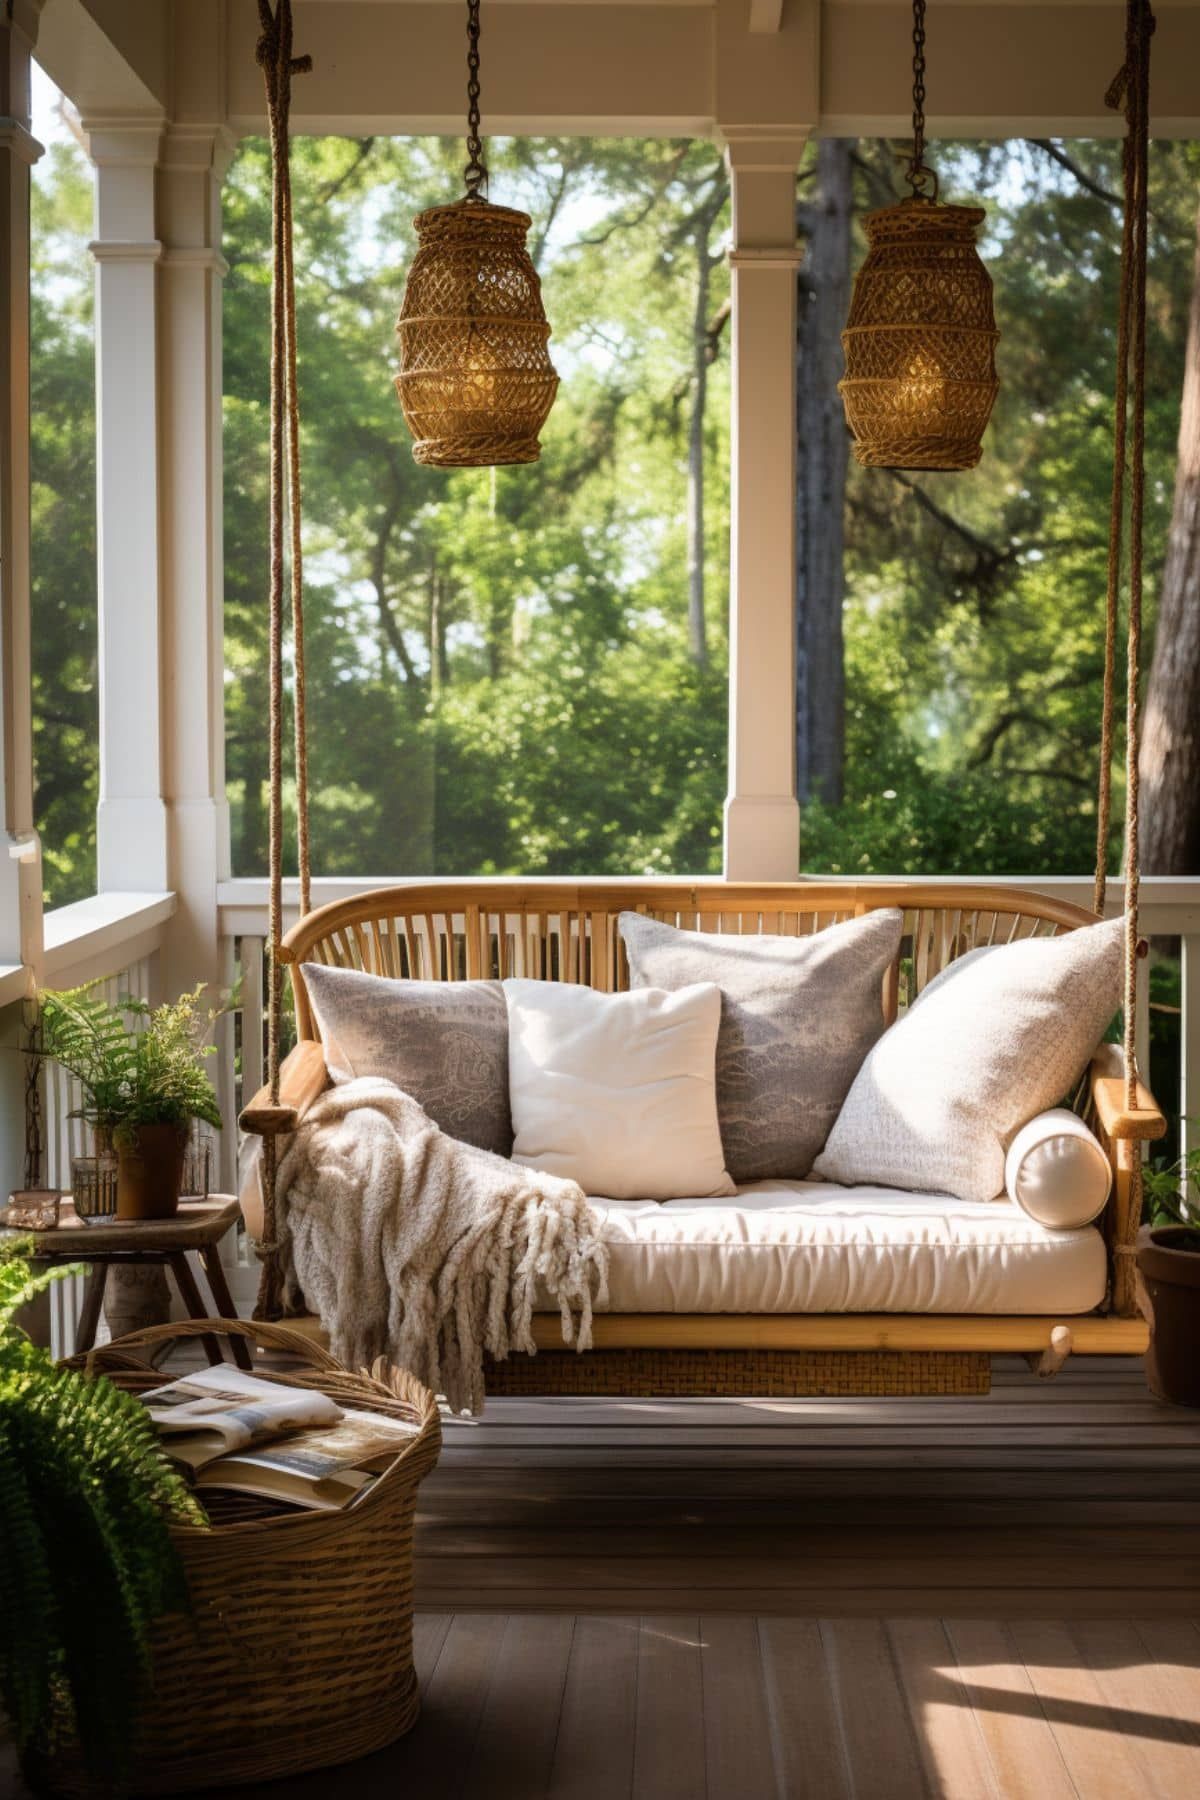 Creative Ways to Make Your Porch Feel Cozy and inviting